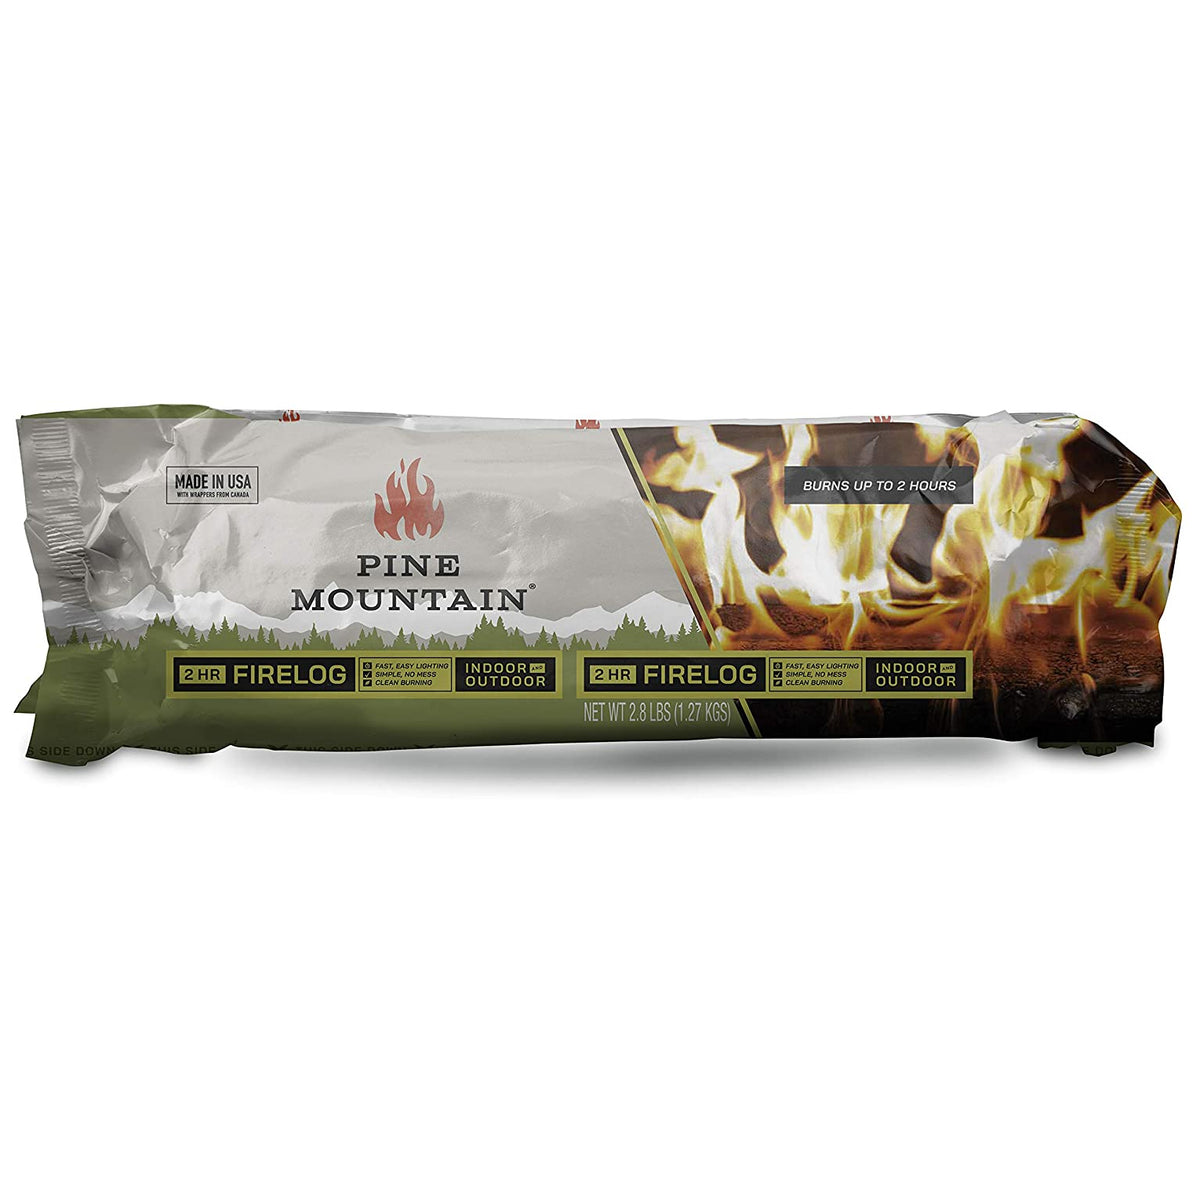 Pine Mountain 500-160-801 Traditional Firelogs, 2-Hour Burn Time, 6-Pack